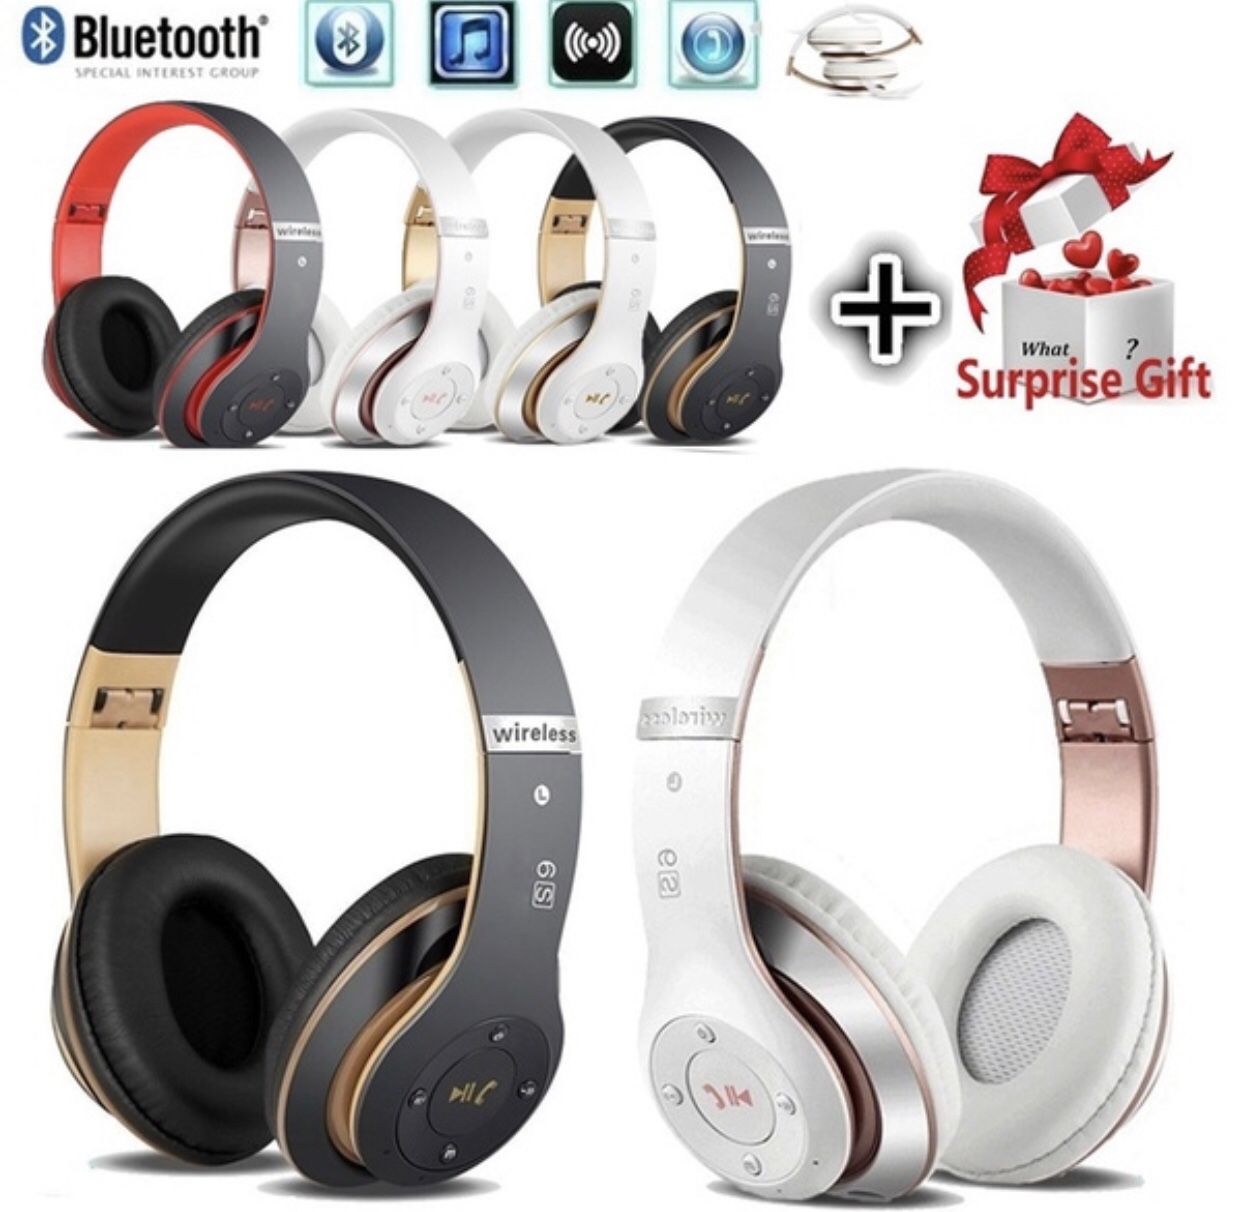 6S Bluetooth Headphones Wireless Bluetooth 4.0 Heavy Bass Stereo Folding Headphones with Mic Support TF SD Card